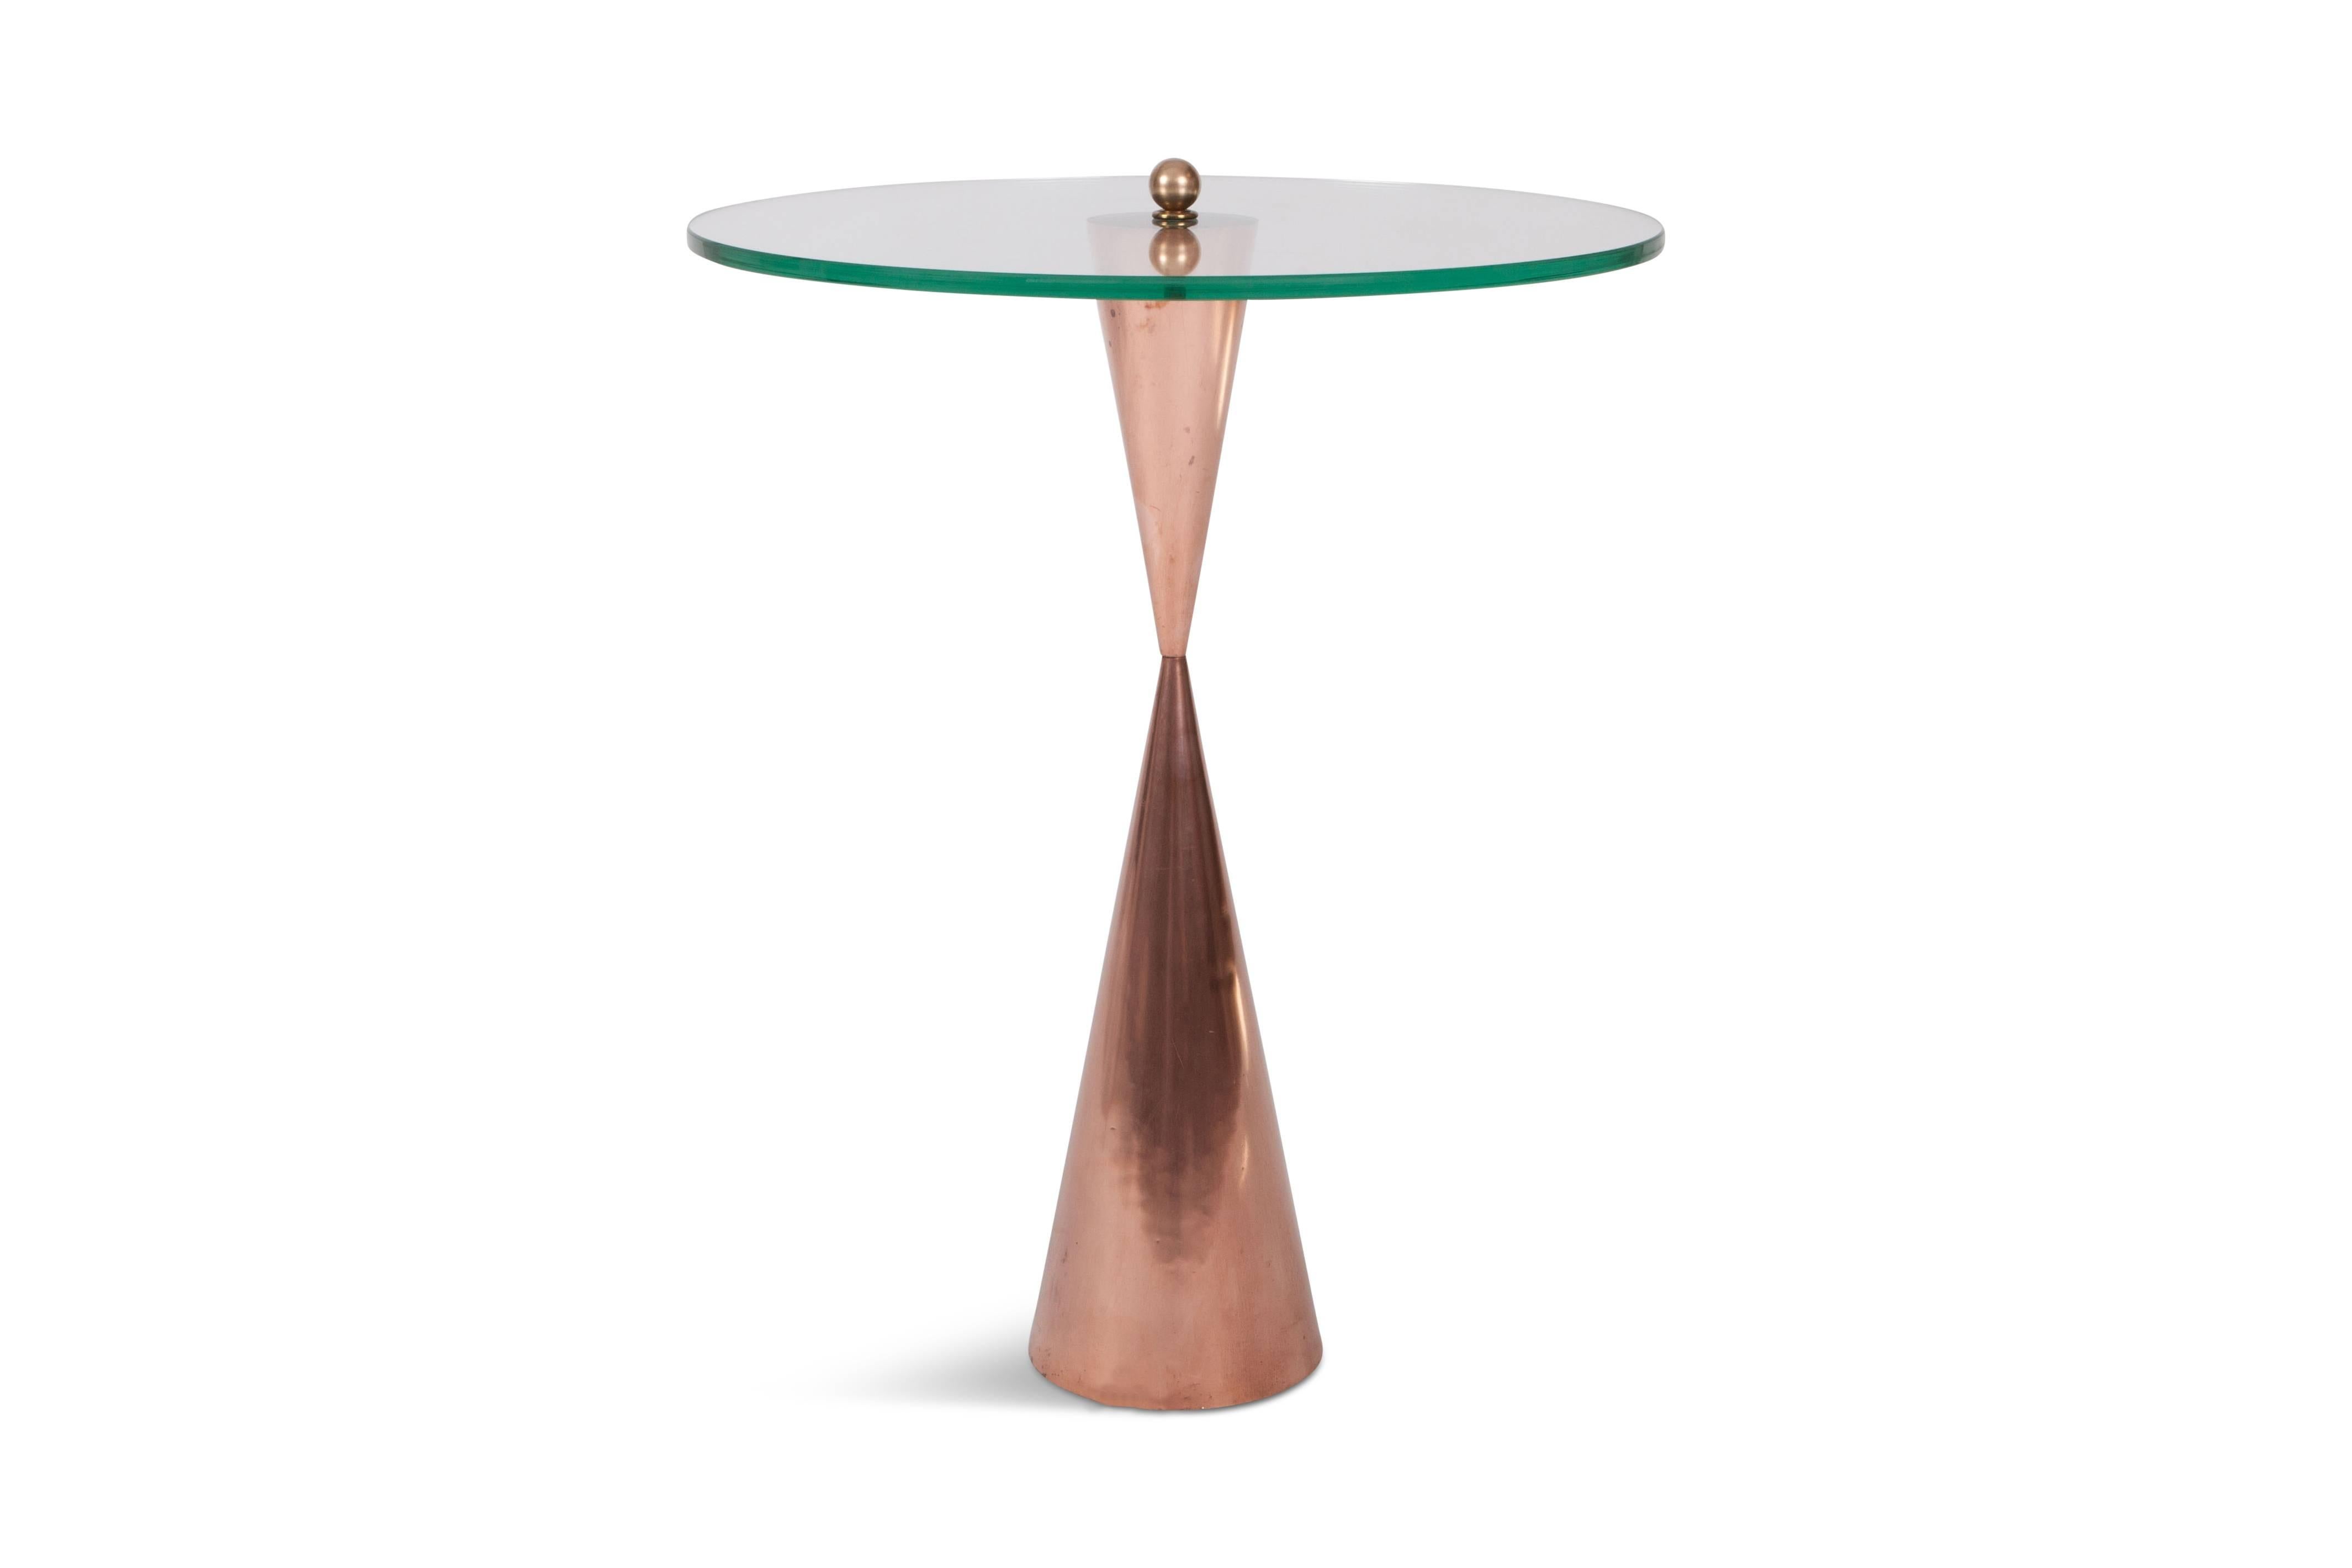 Mid-Century Modern Copper side table with round glass top.

Would fit well in an eclectic Minimalist or Hollywood Regency inspired interior.

 